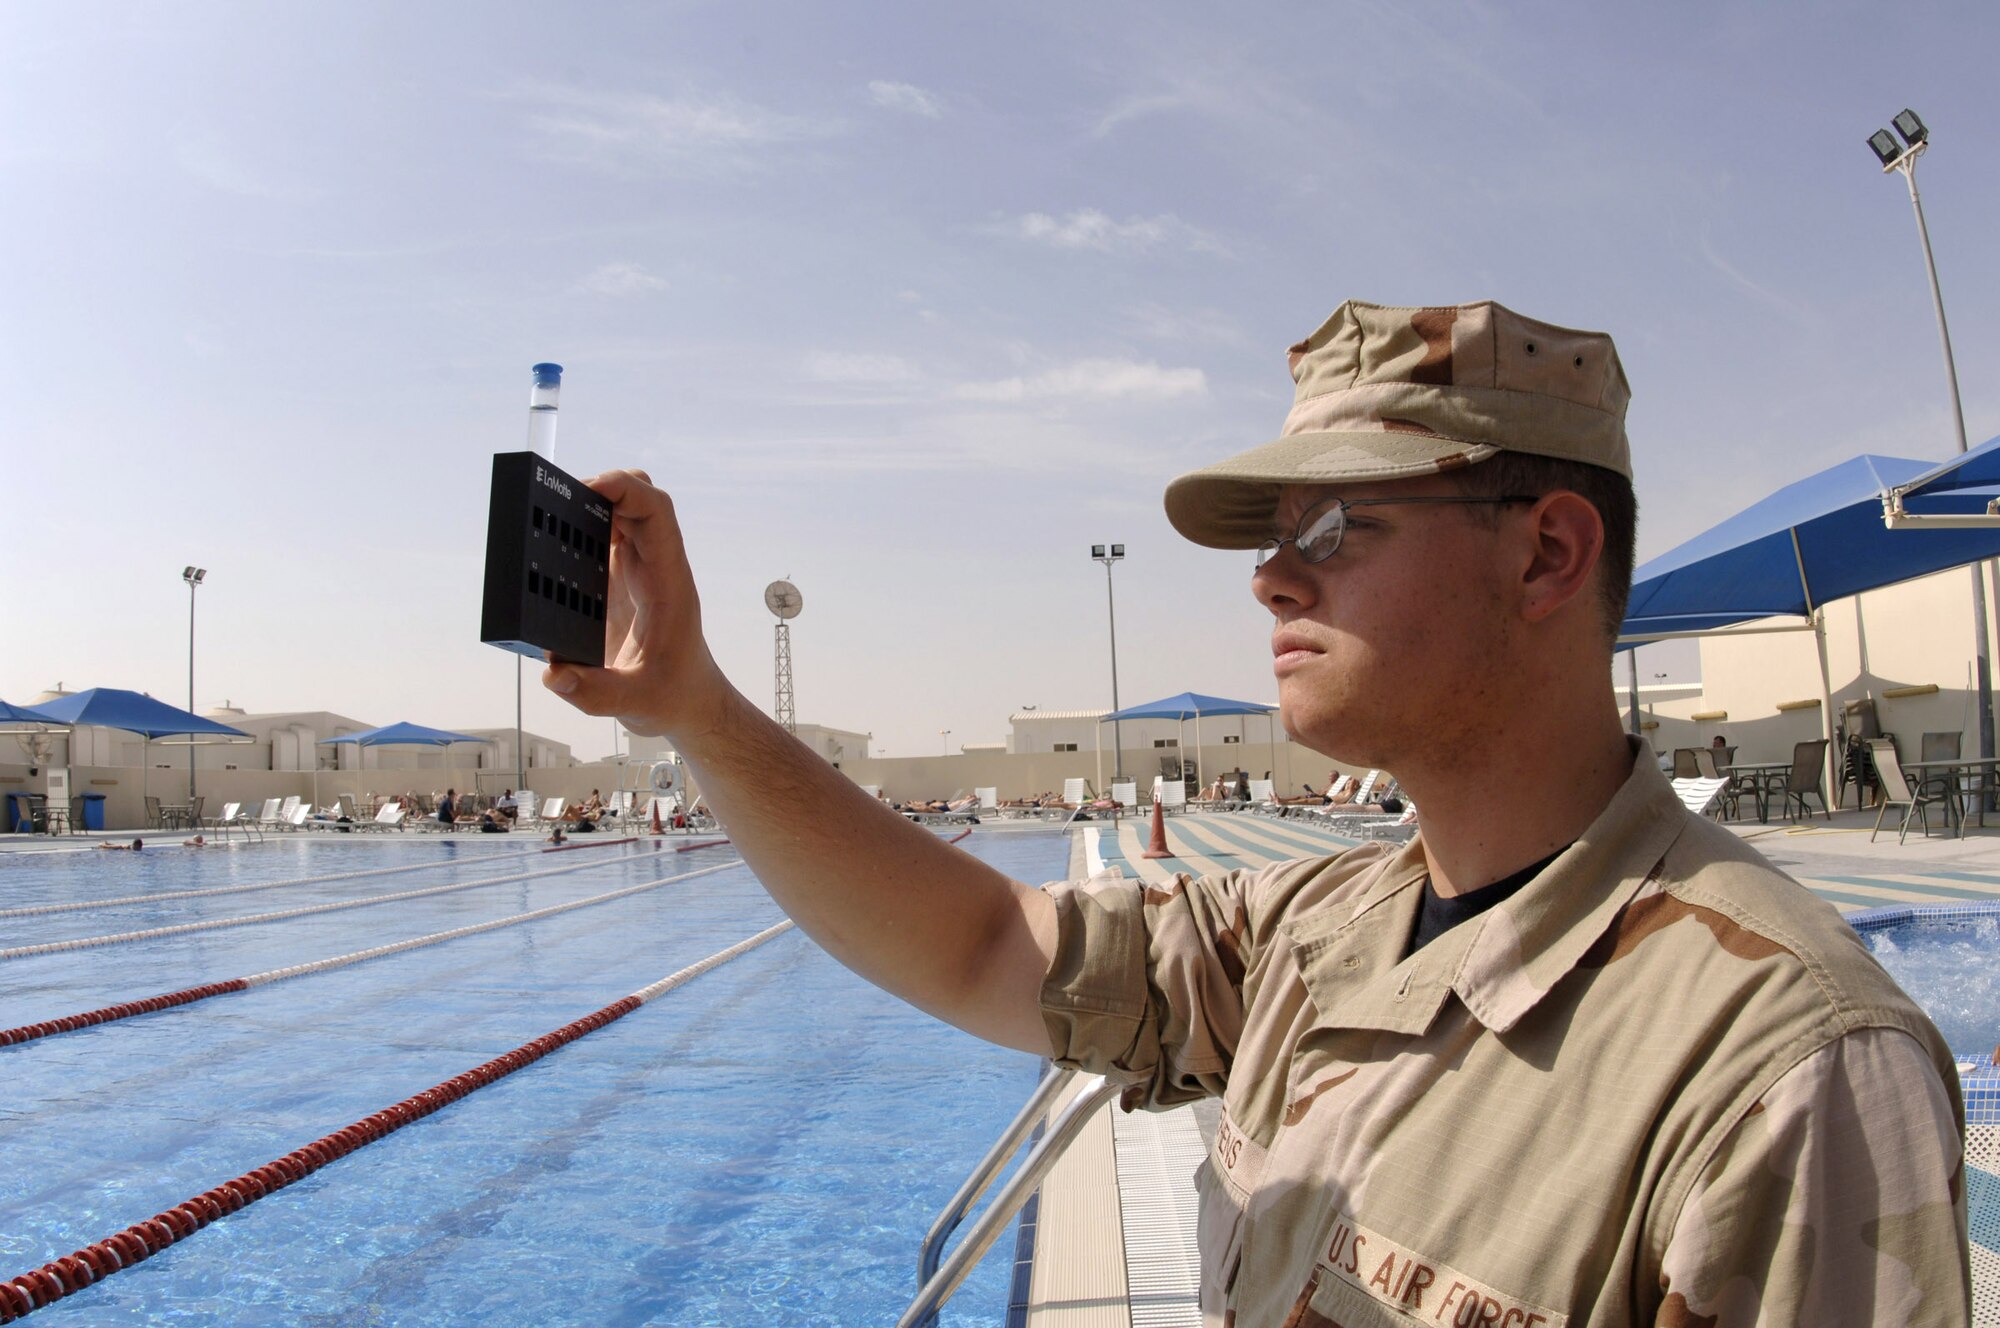 Airman 1st Class Brandon Stephens uses a chlorine kit to test pool water, which is checked weekly in Southwest Asia. Airman Stephens is a bioenvironmental engineering technician with the 379 Expeditionary Medical Group. (U.S. Air Force photo/Senior Airman Ricky Best)